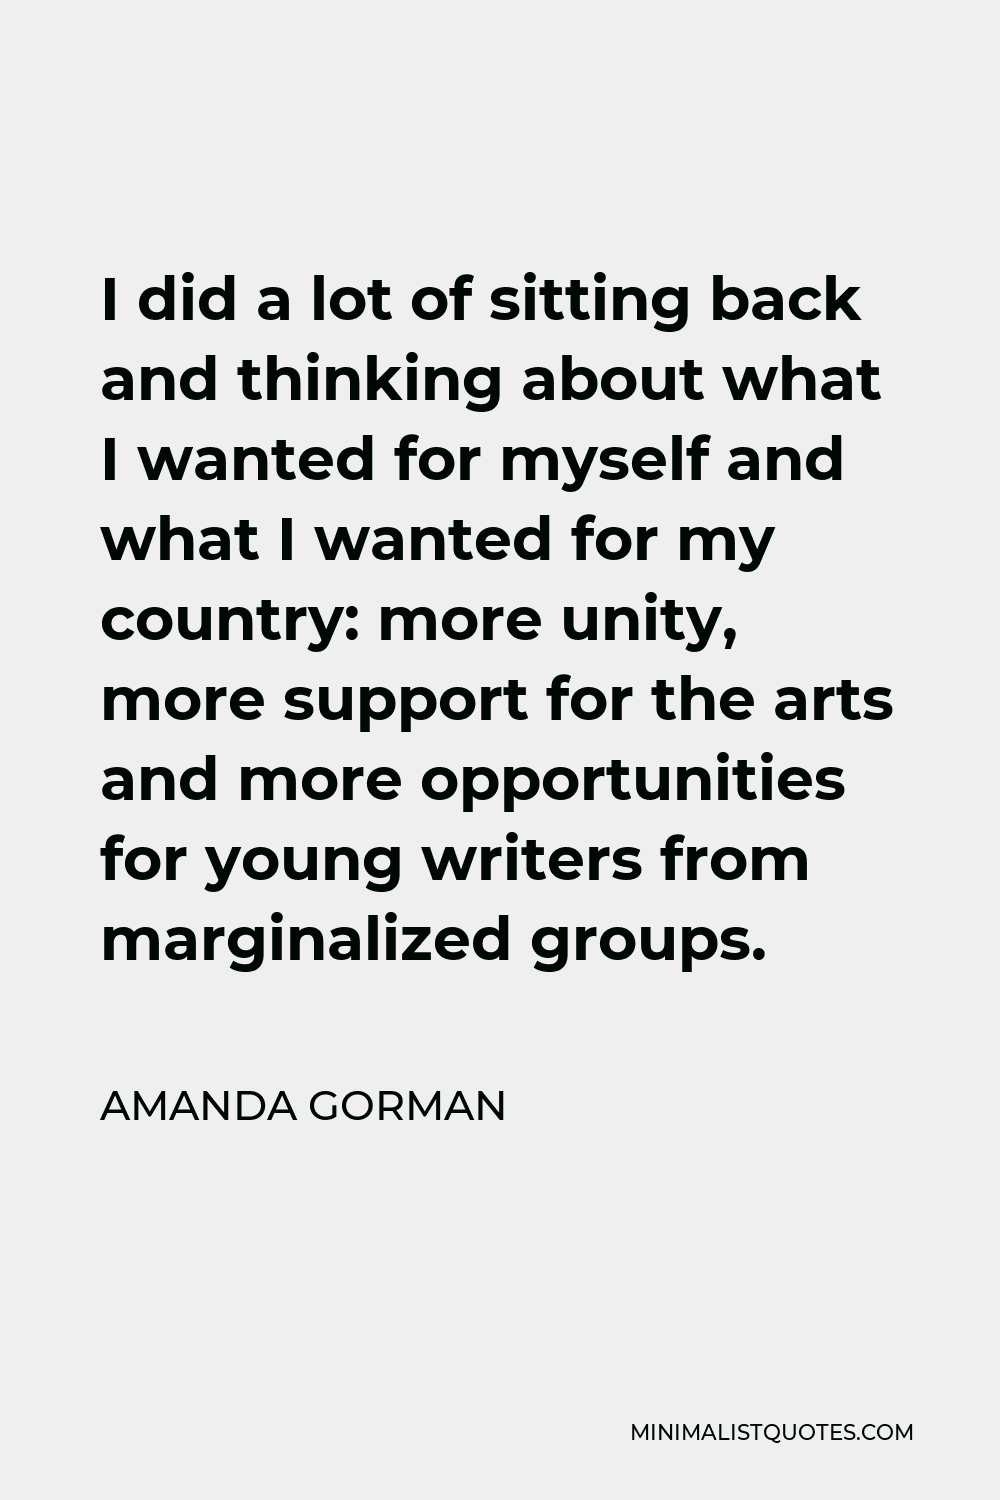 Amanda Gorman Quote - I did a lot of sitting back and thinking about what I wanted for myself and what I wanted for my country: more unity, more support for the arts and more opportunities for young writers from marginalized groups.